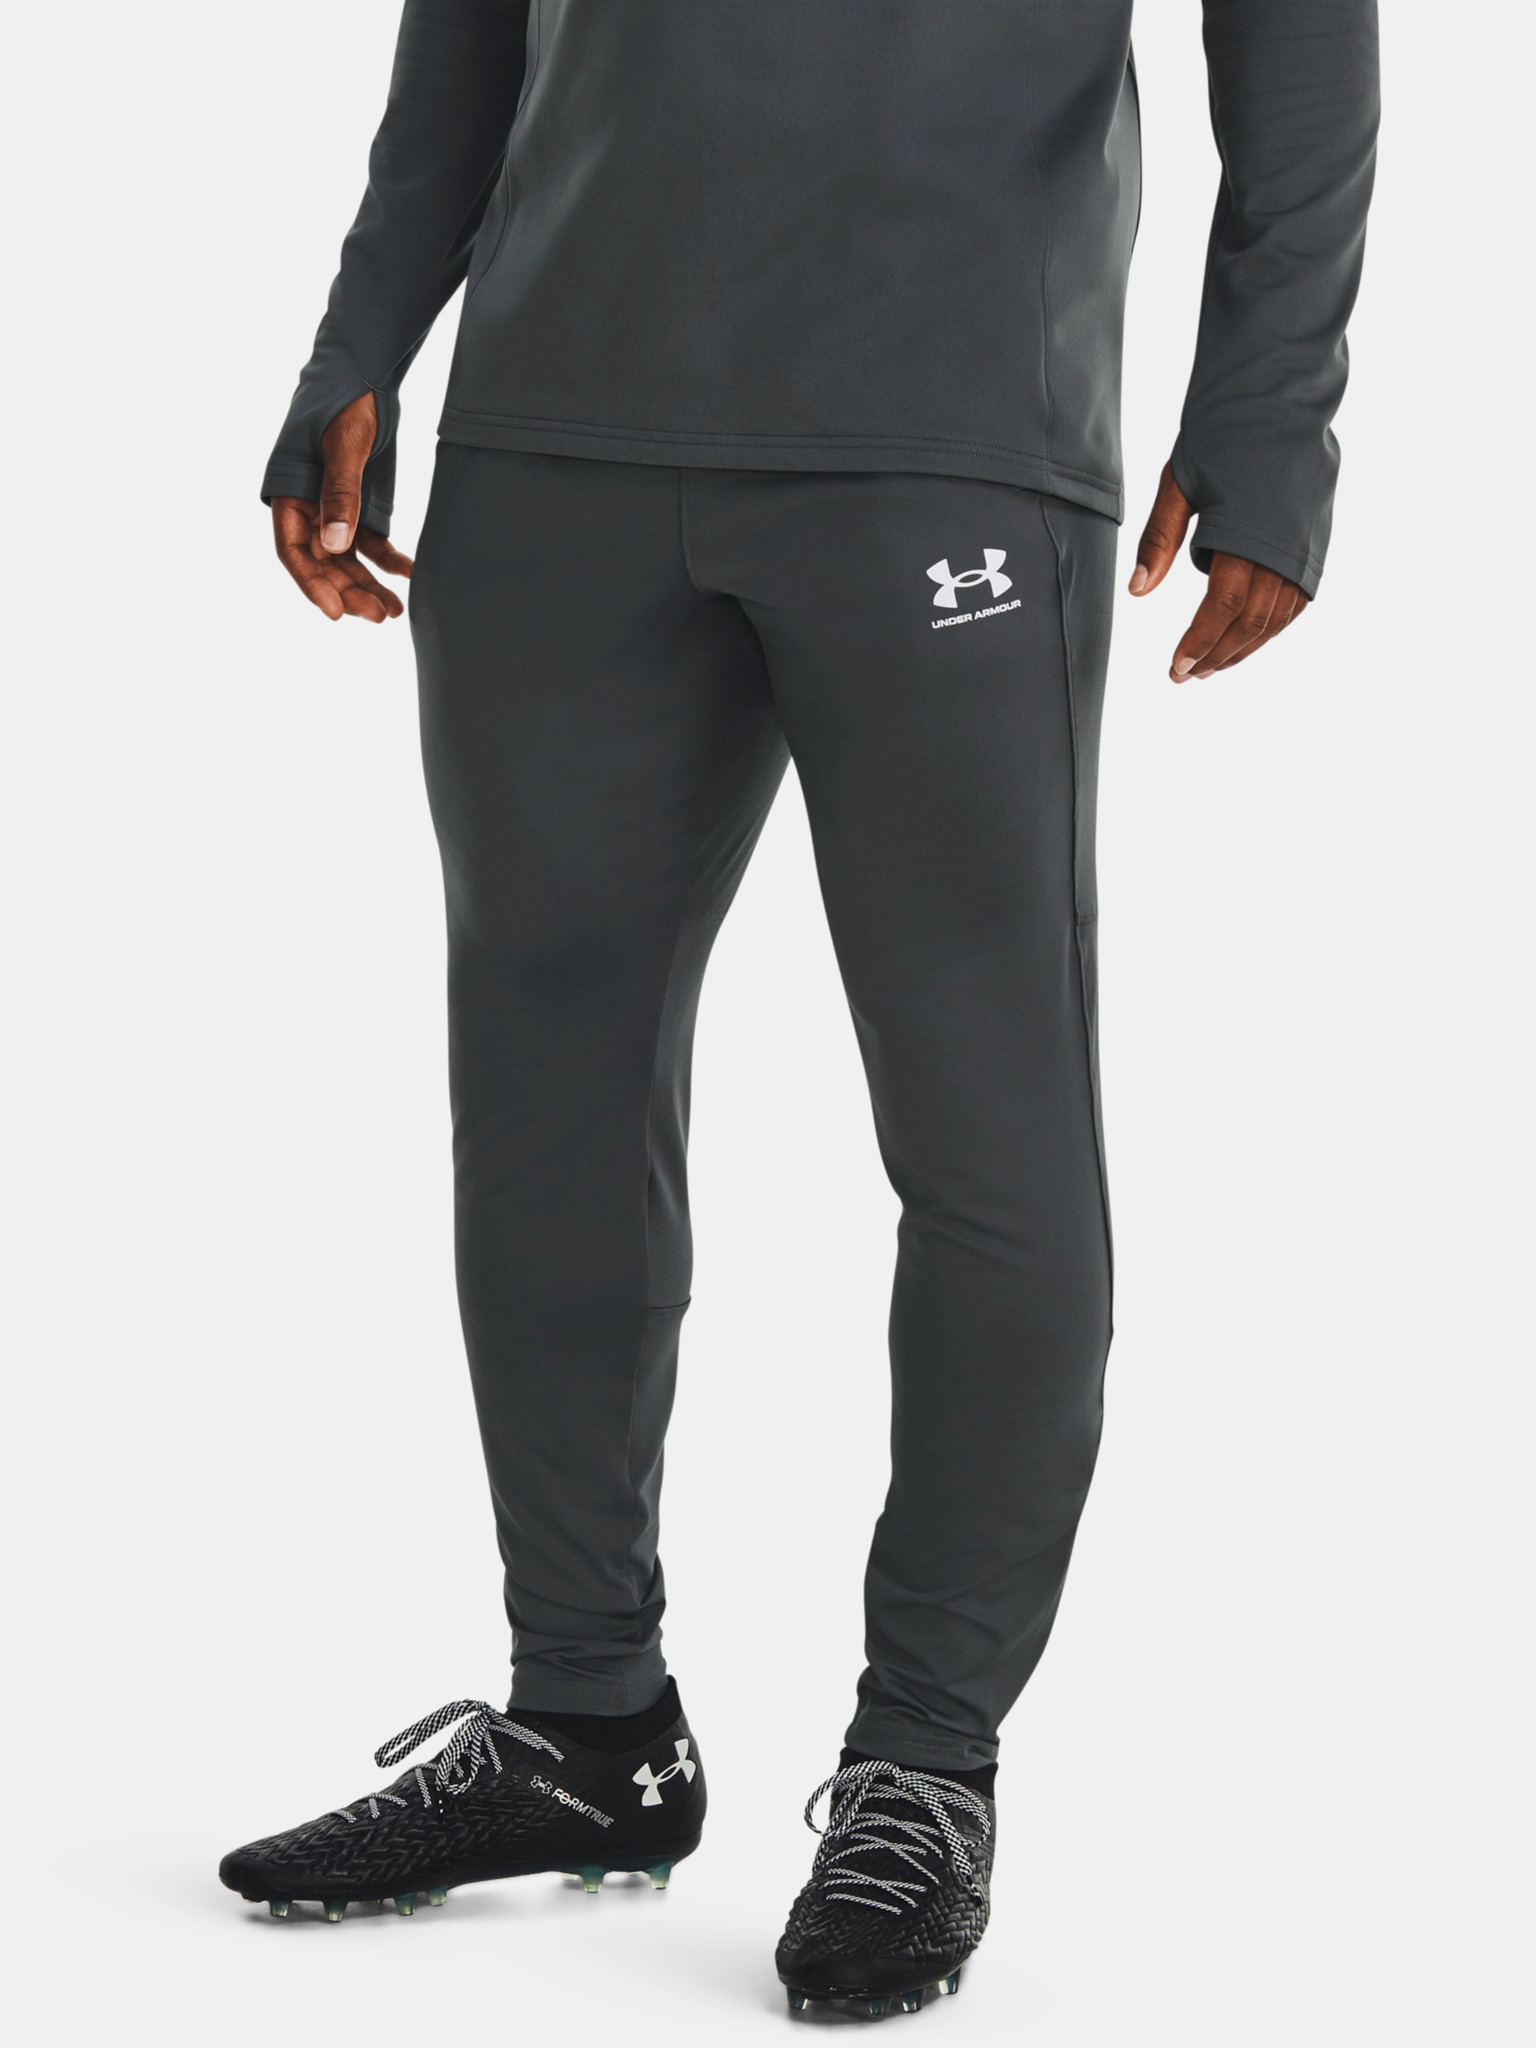 Under Armour - Tac Patrol Pant II Trousers